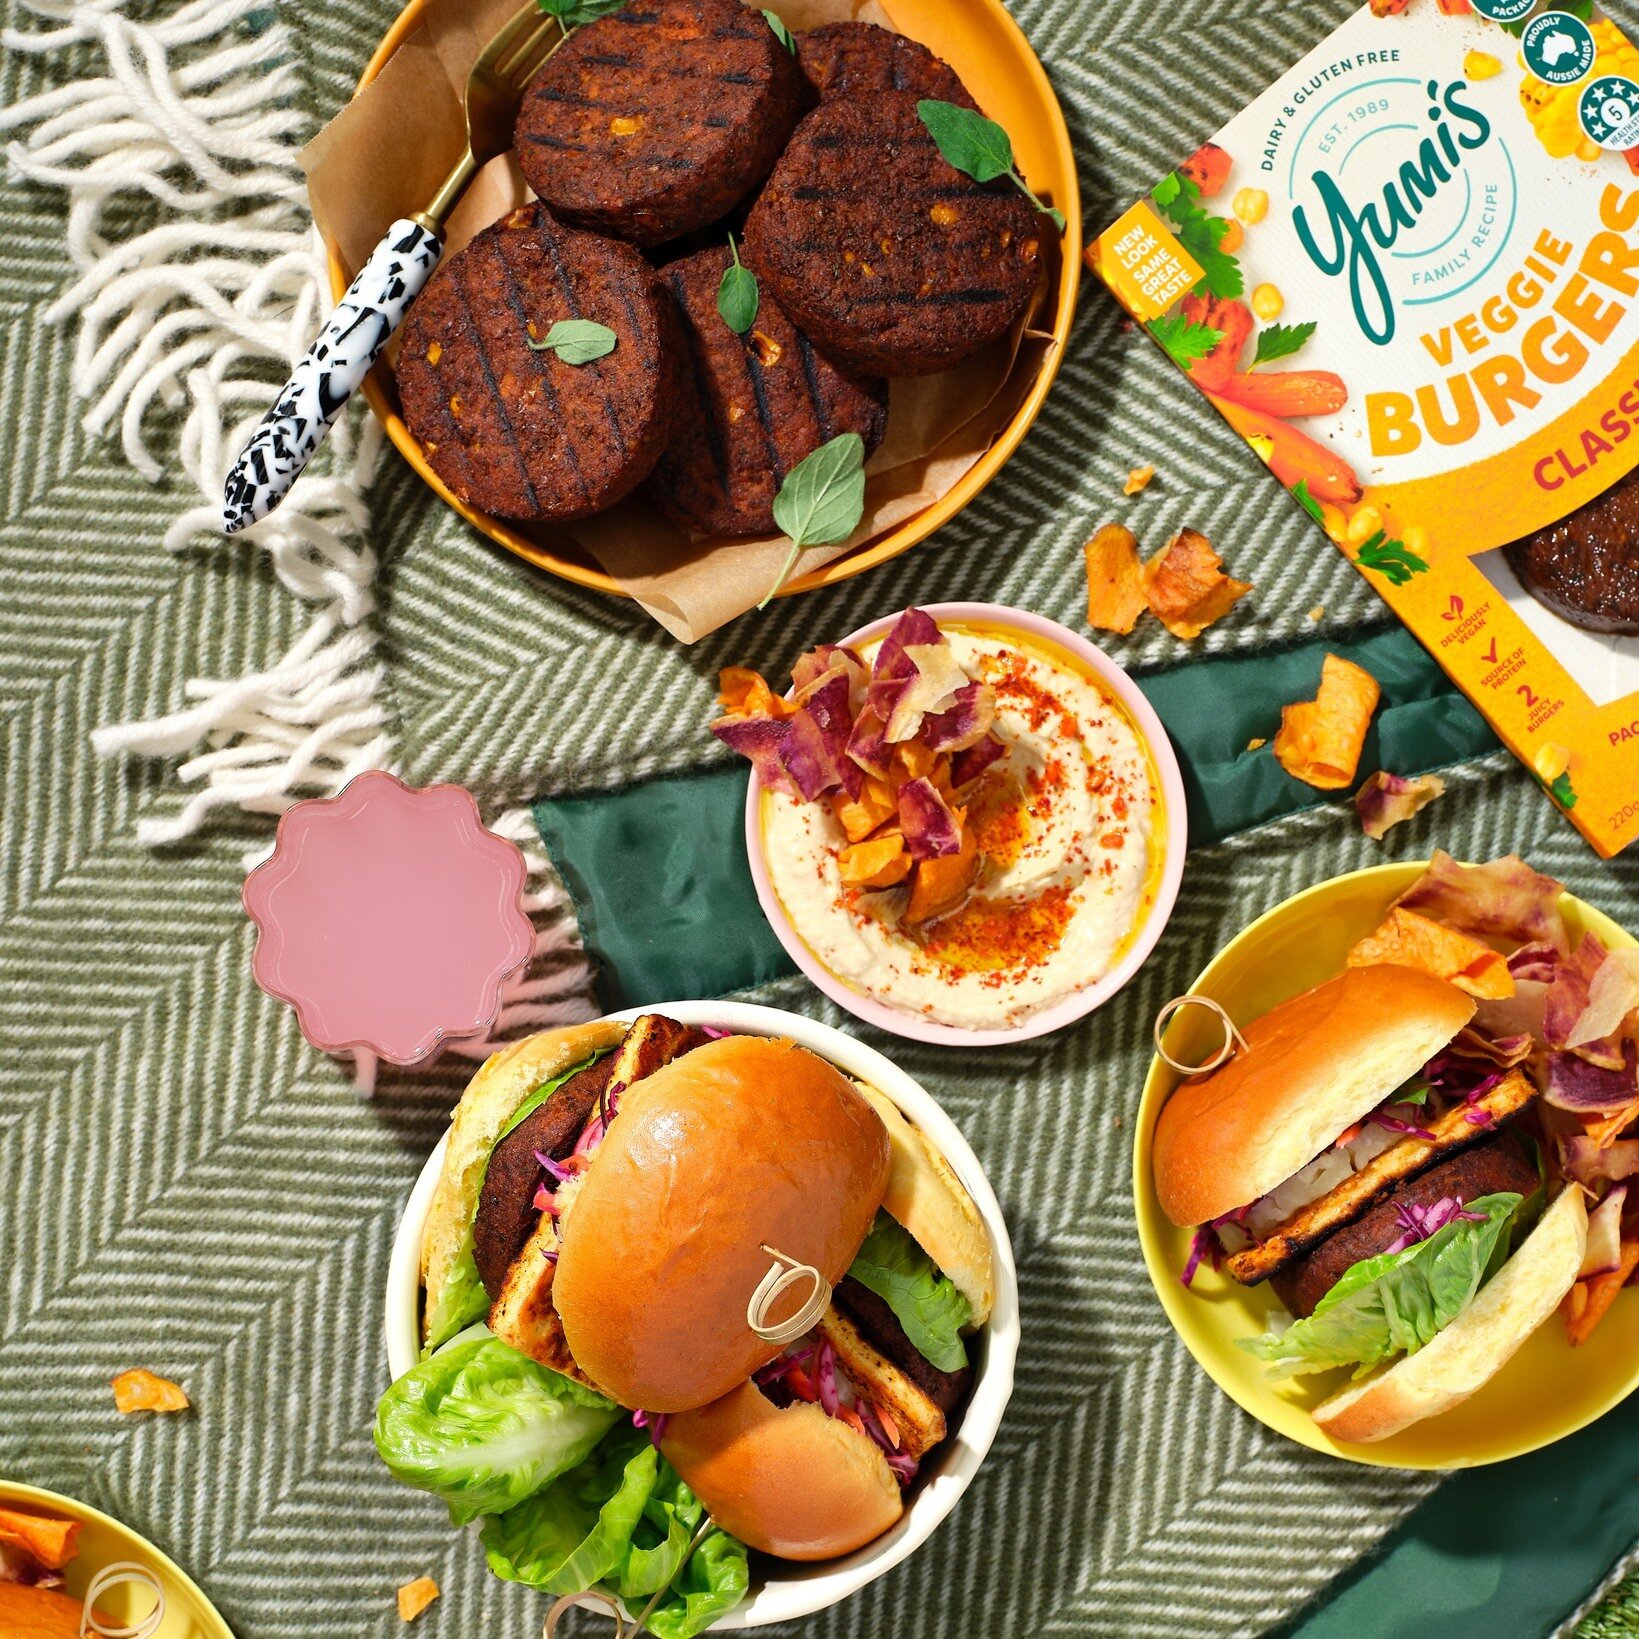 !! RECIPE DROP !!

Everyone says their burgers are the best, but this Yumi's Veggie Chipotle Haloumi Burger will win you hero status at the next family barbie.
Go on legend, copy the recipe link below and get grillin'.
https://yumis.com.au/recipes/ch